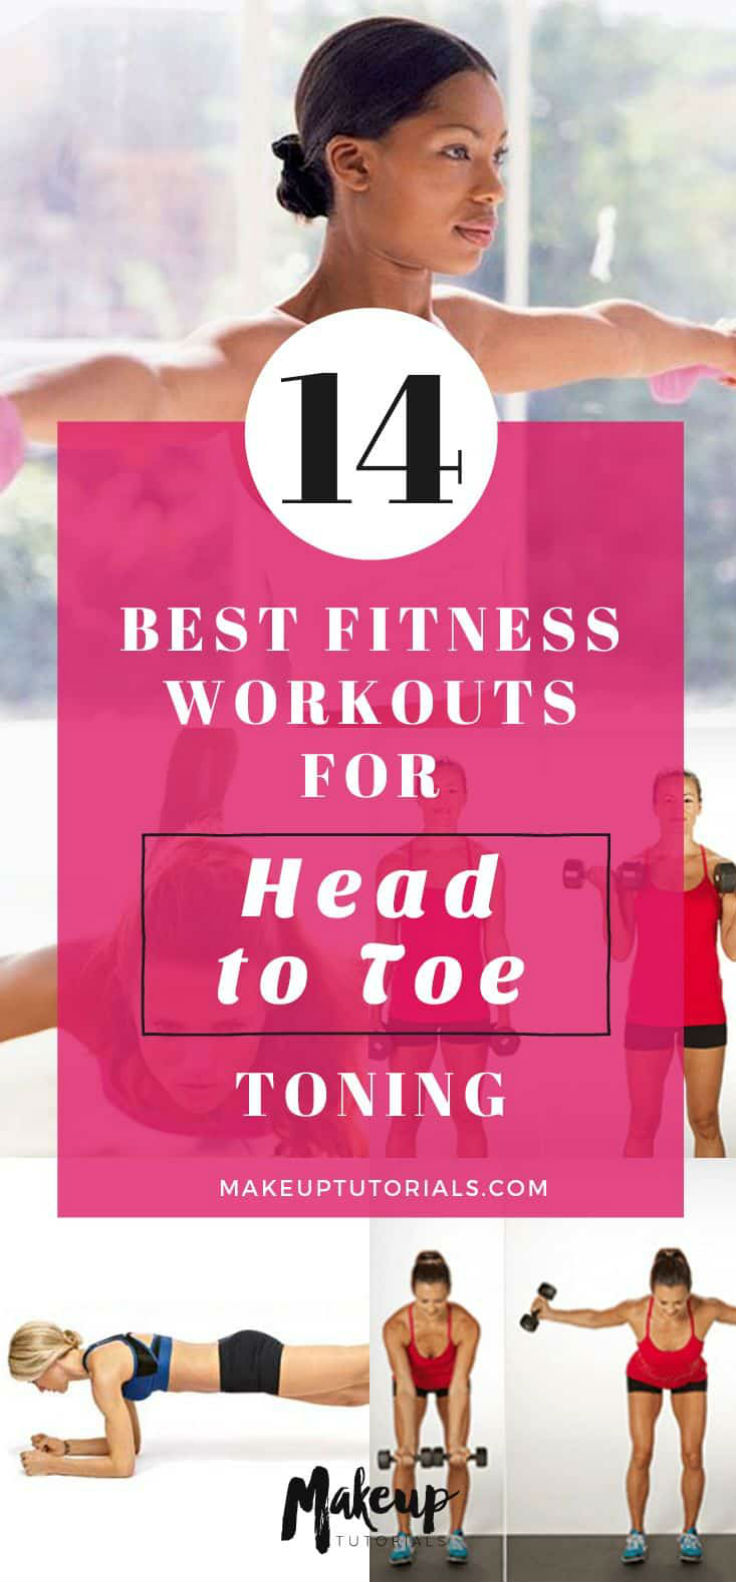 Best Fitness Workouts for Head to Toe Toning | Makeup Tutorials